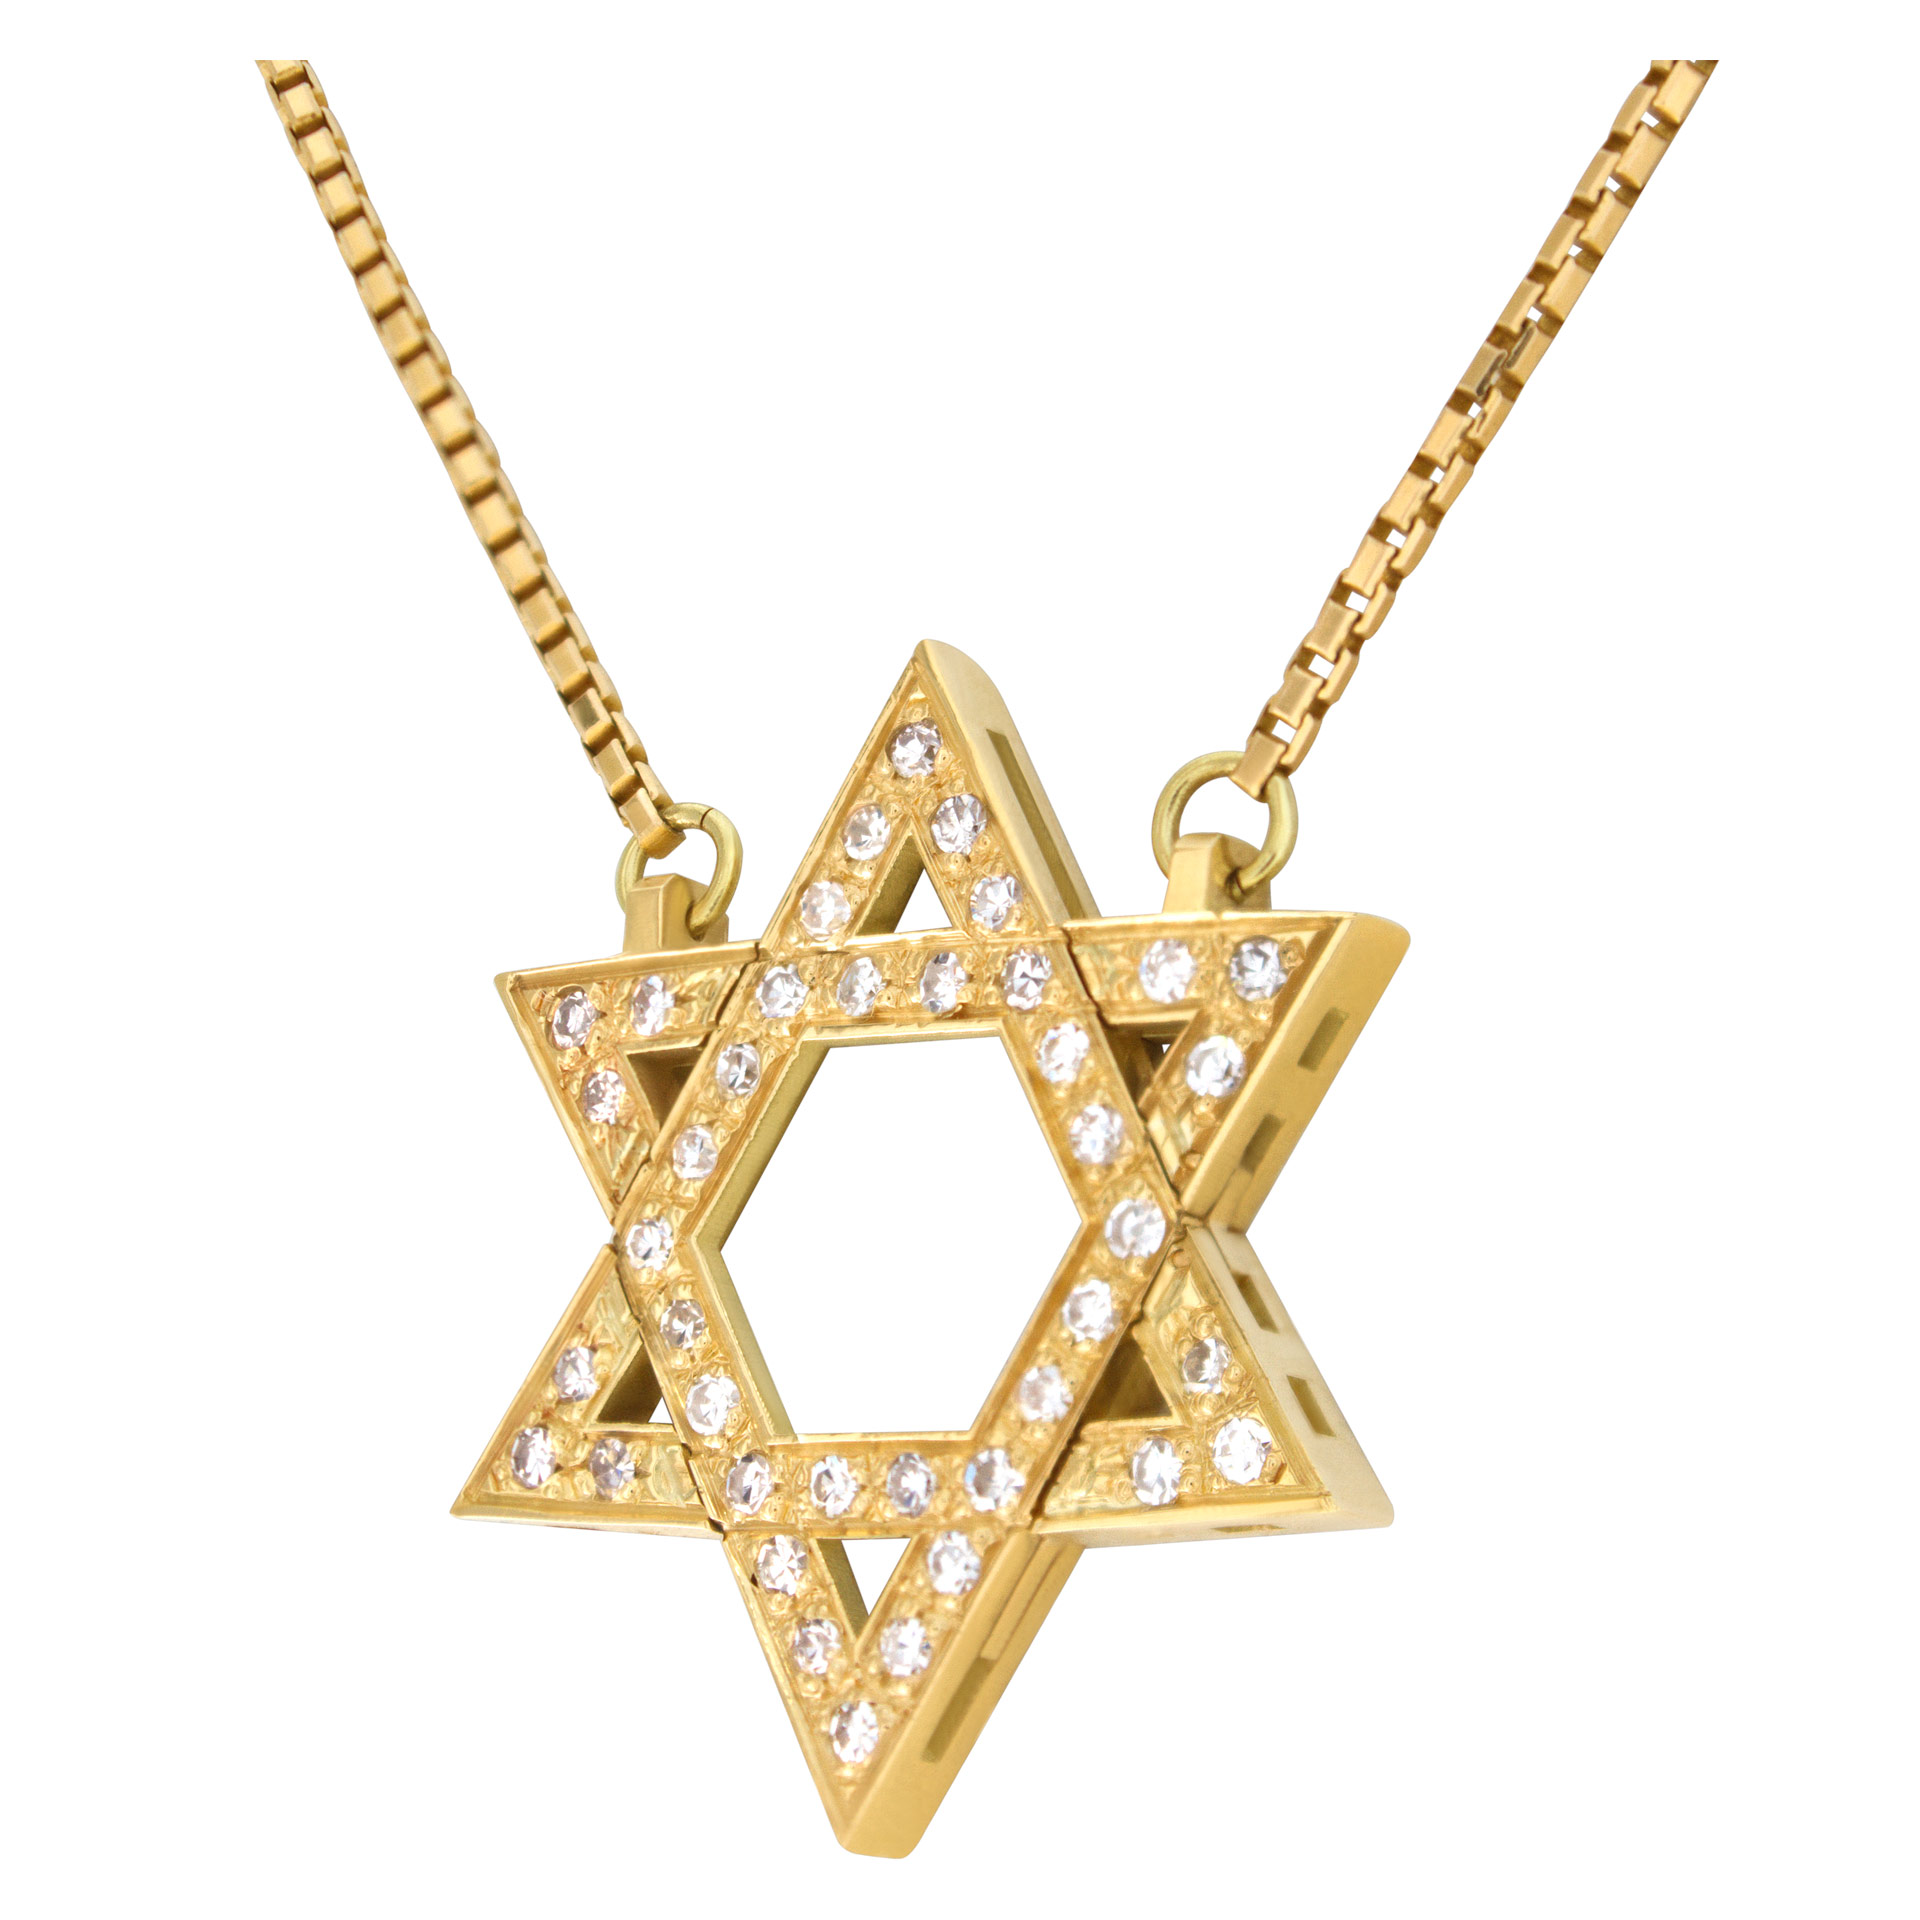 "Star of David" pendant with approximately 0.75 carat pave diamonds set in 18k yellow gold image 3